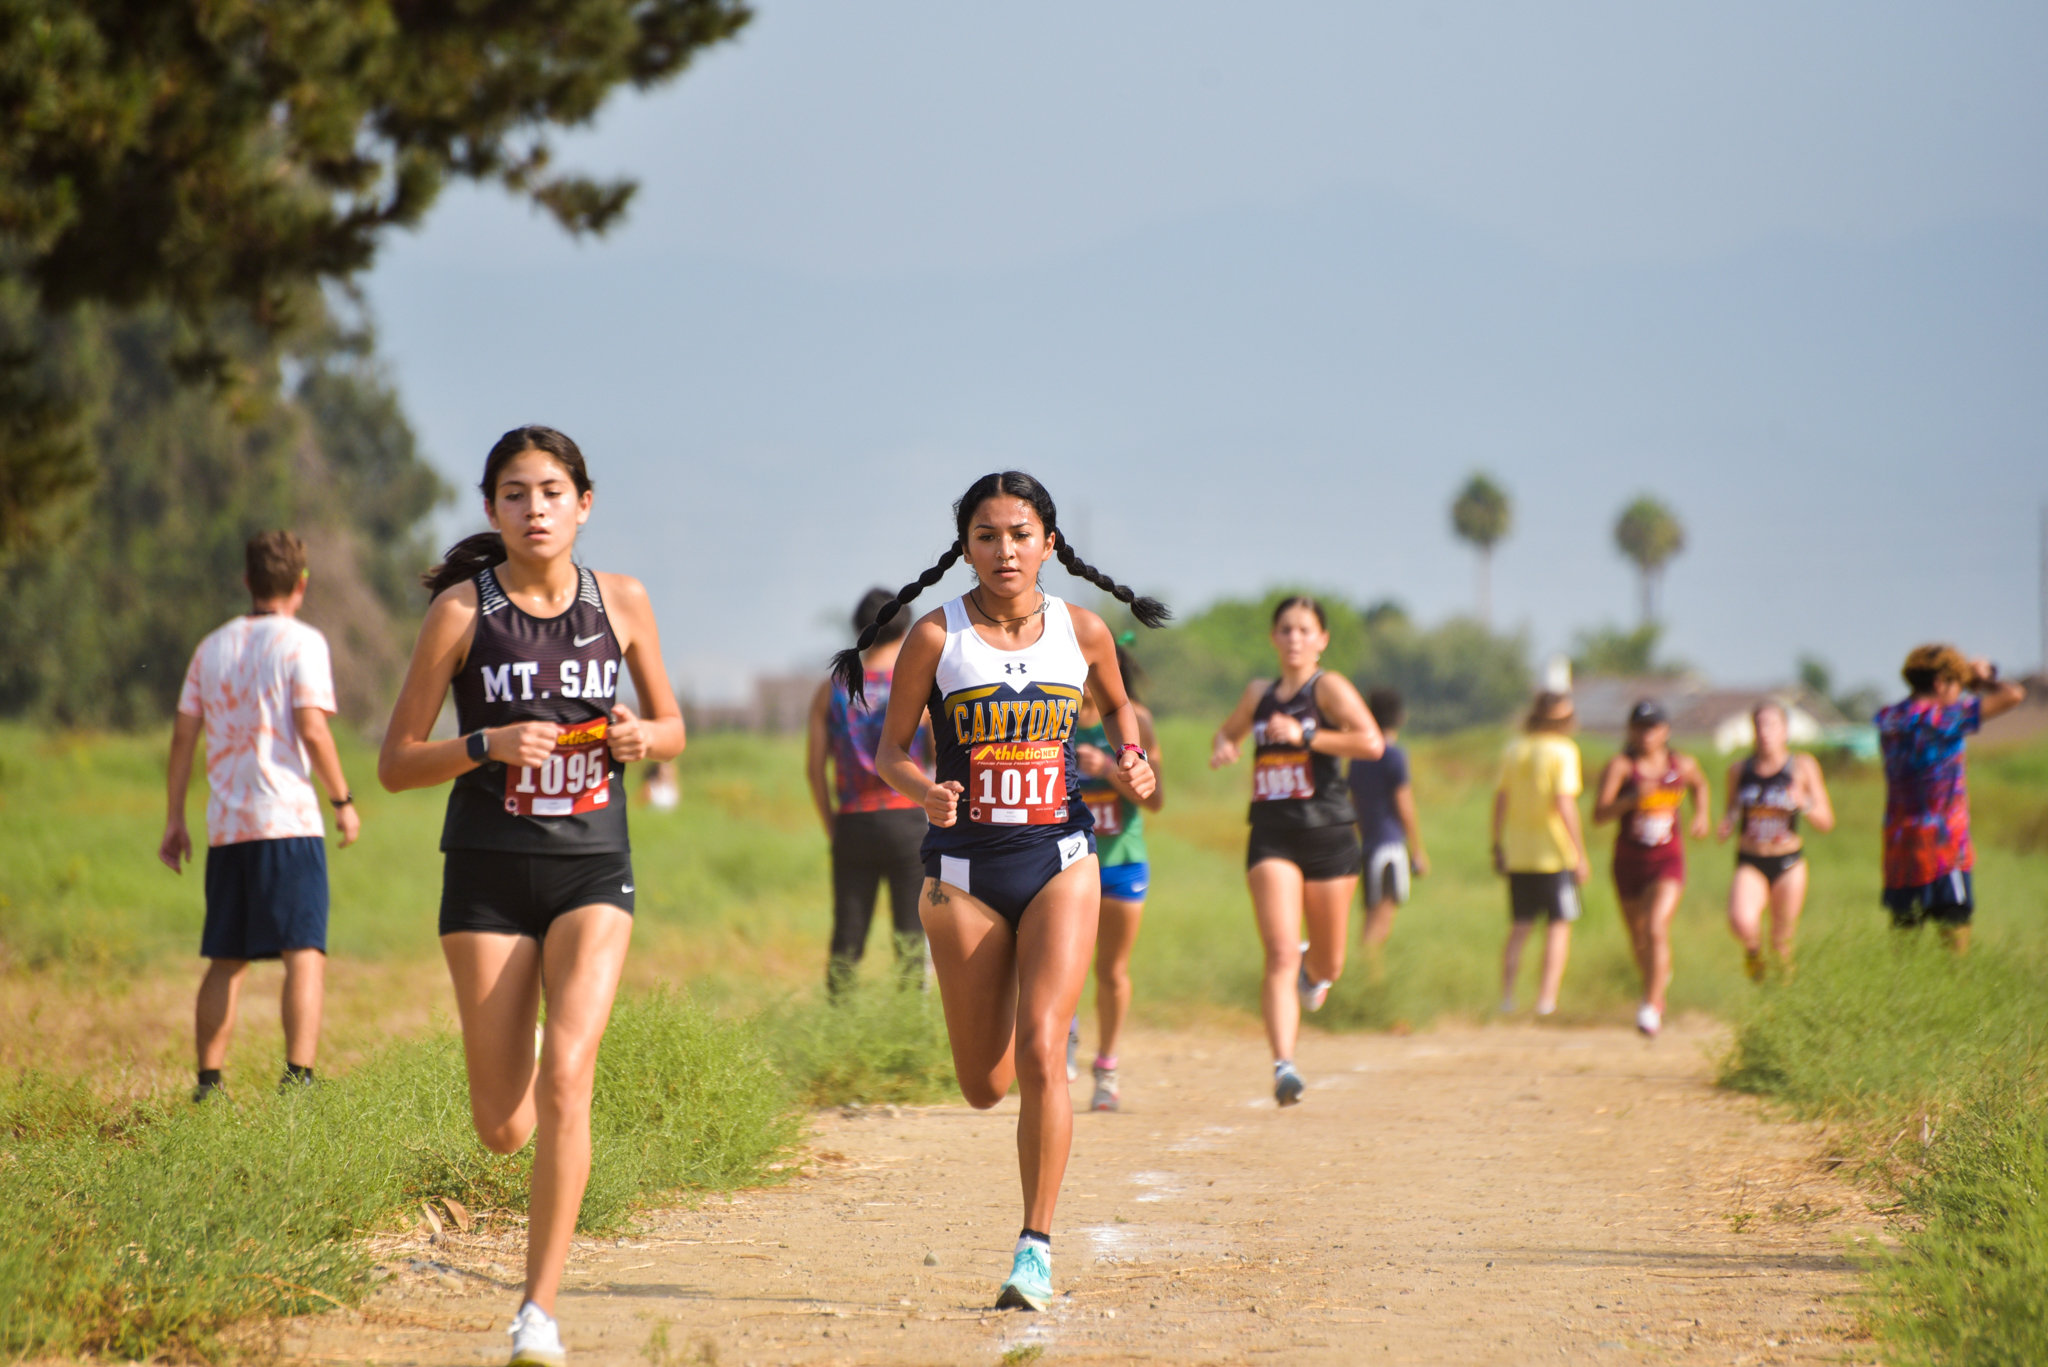 College of the Canyons sophomore Milca Osorio placed third overall with a time of 20:05.6 at the Oxnard College Invitational on Friday, Sept. 9. Osorio has now posted back-to-back top-four finishes to begin the season. —Mari Kneisel/COC Sports Information